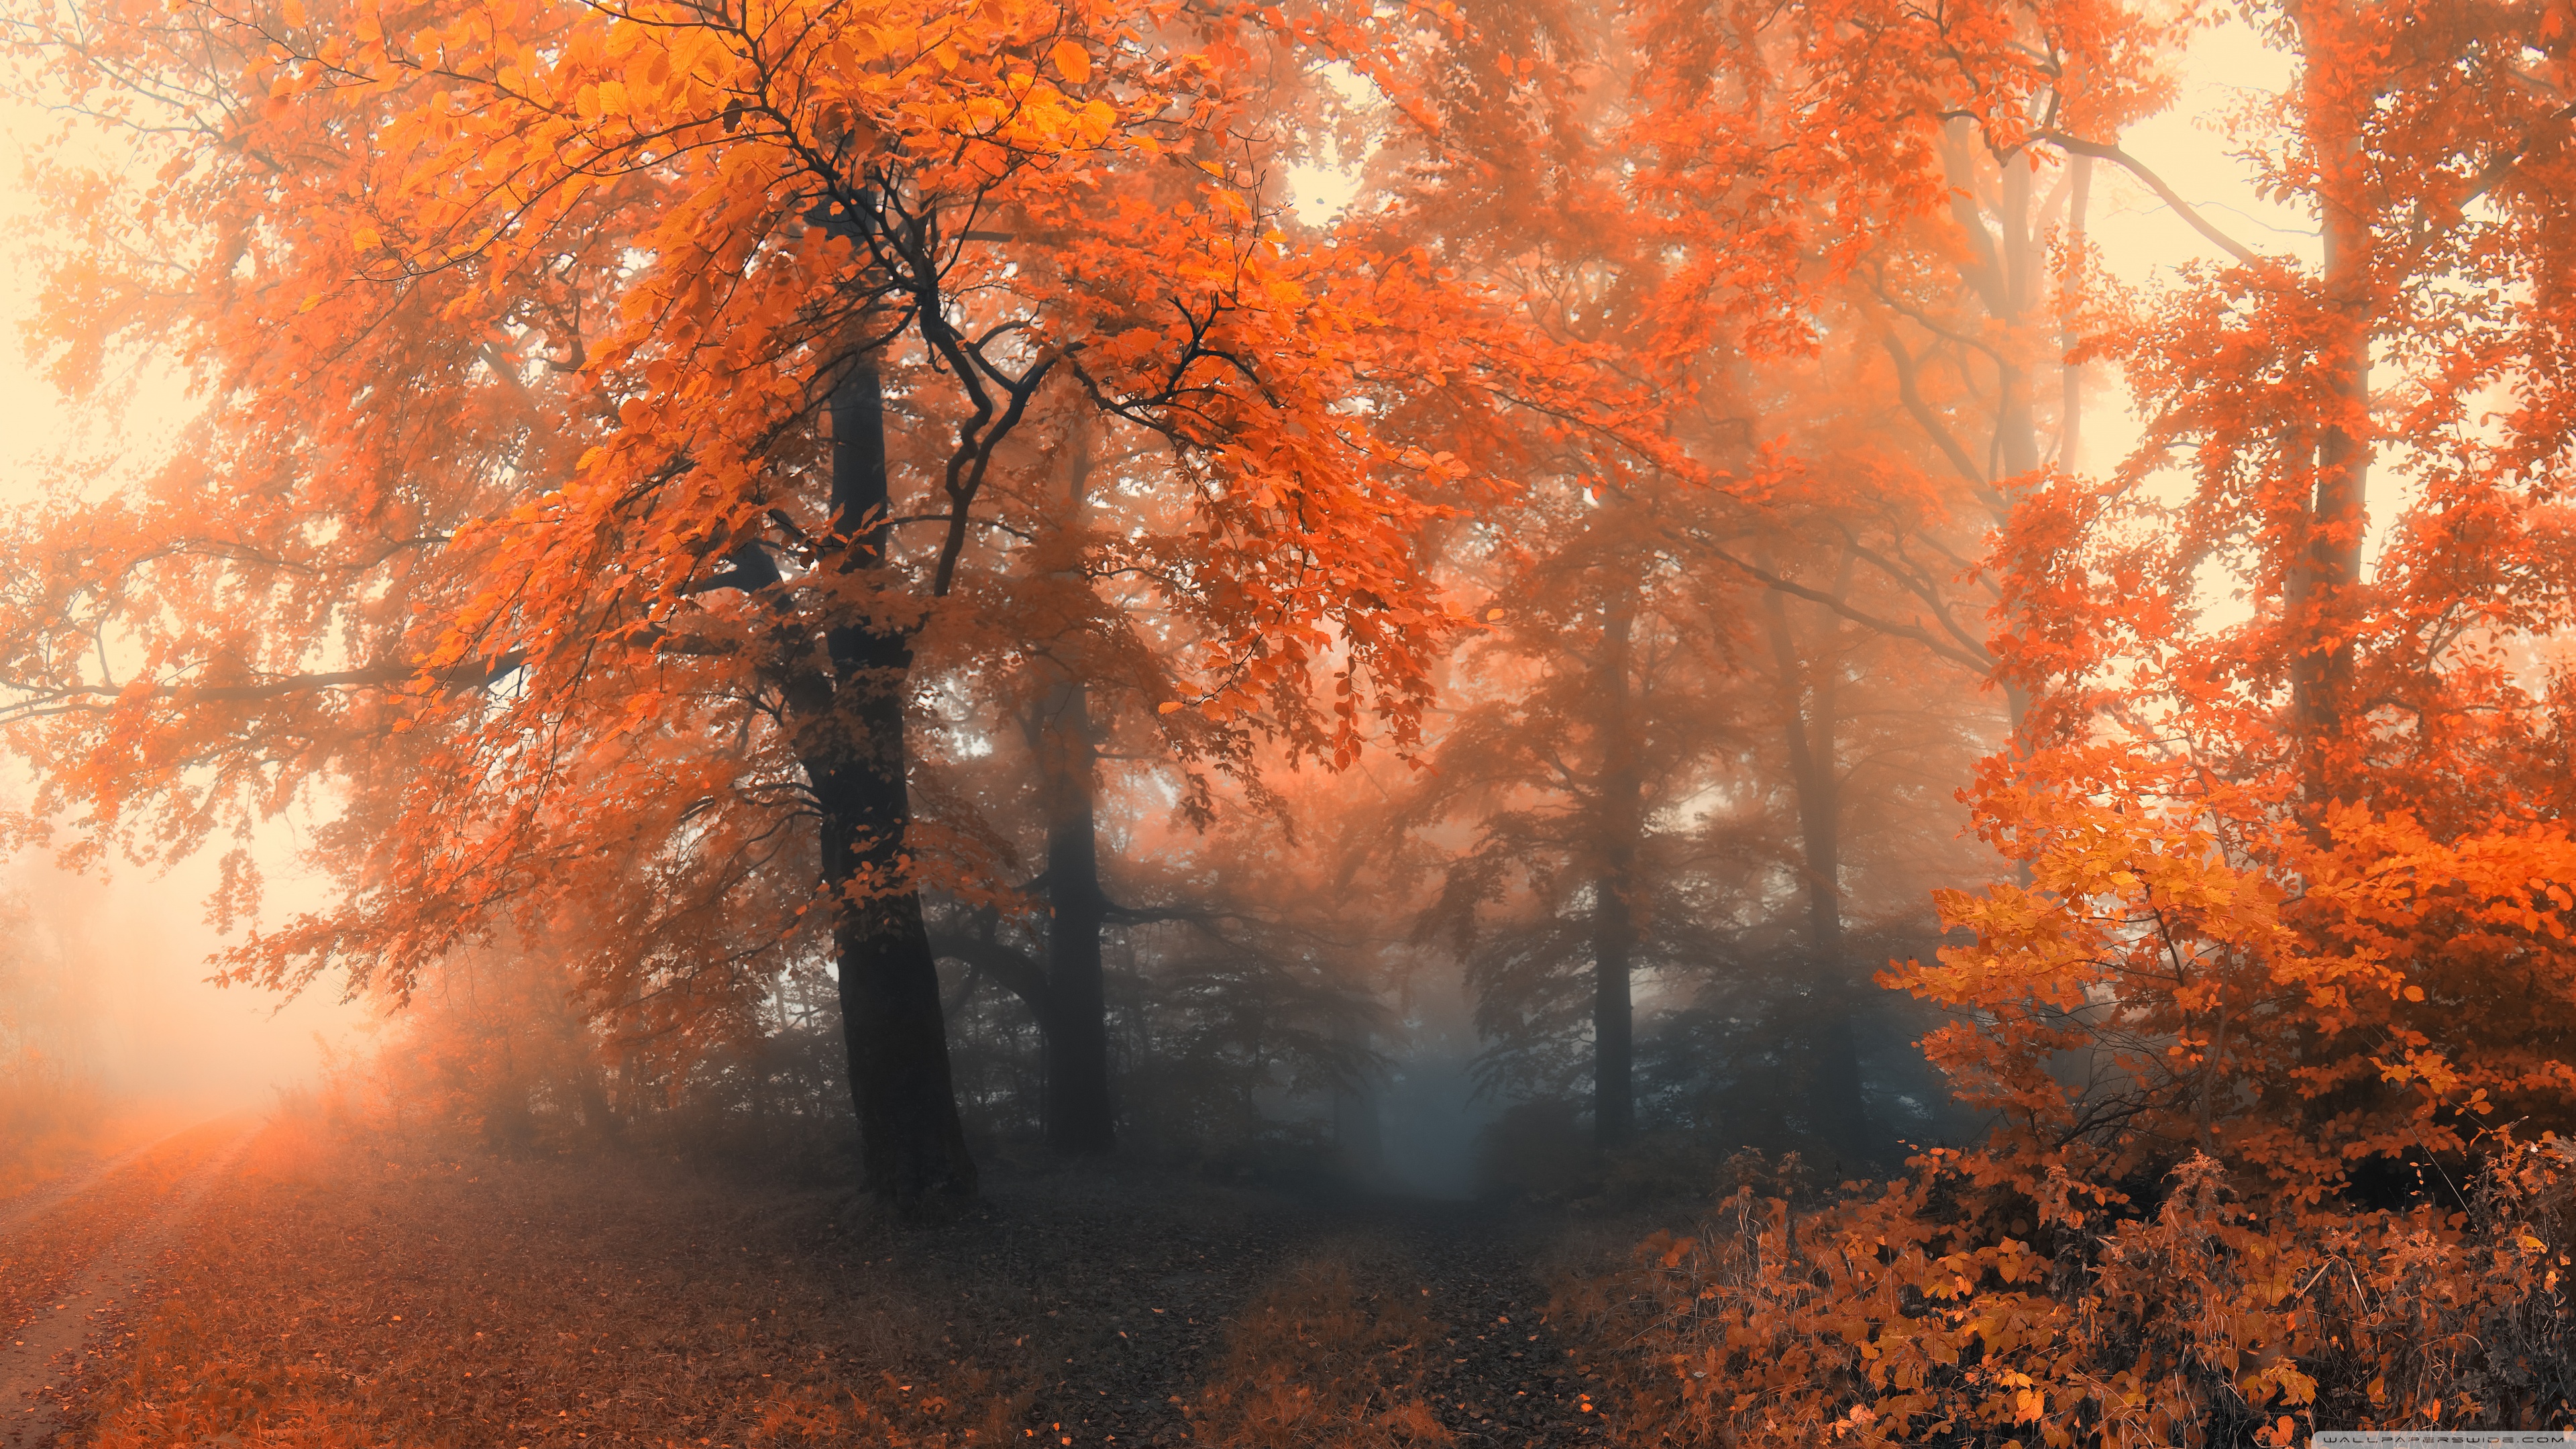 Autumn Ultra HD Desktop Background Wallpaper for: Multi Display, Dual Monitor, Tablet